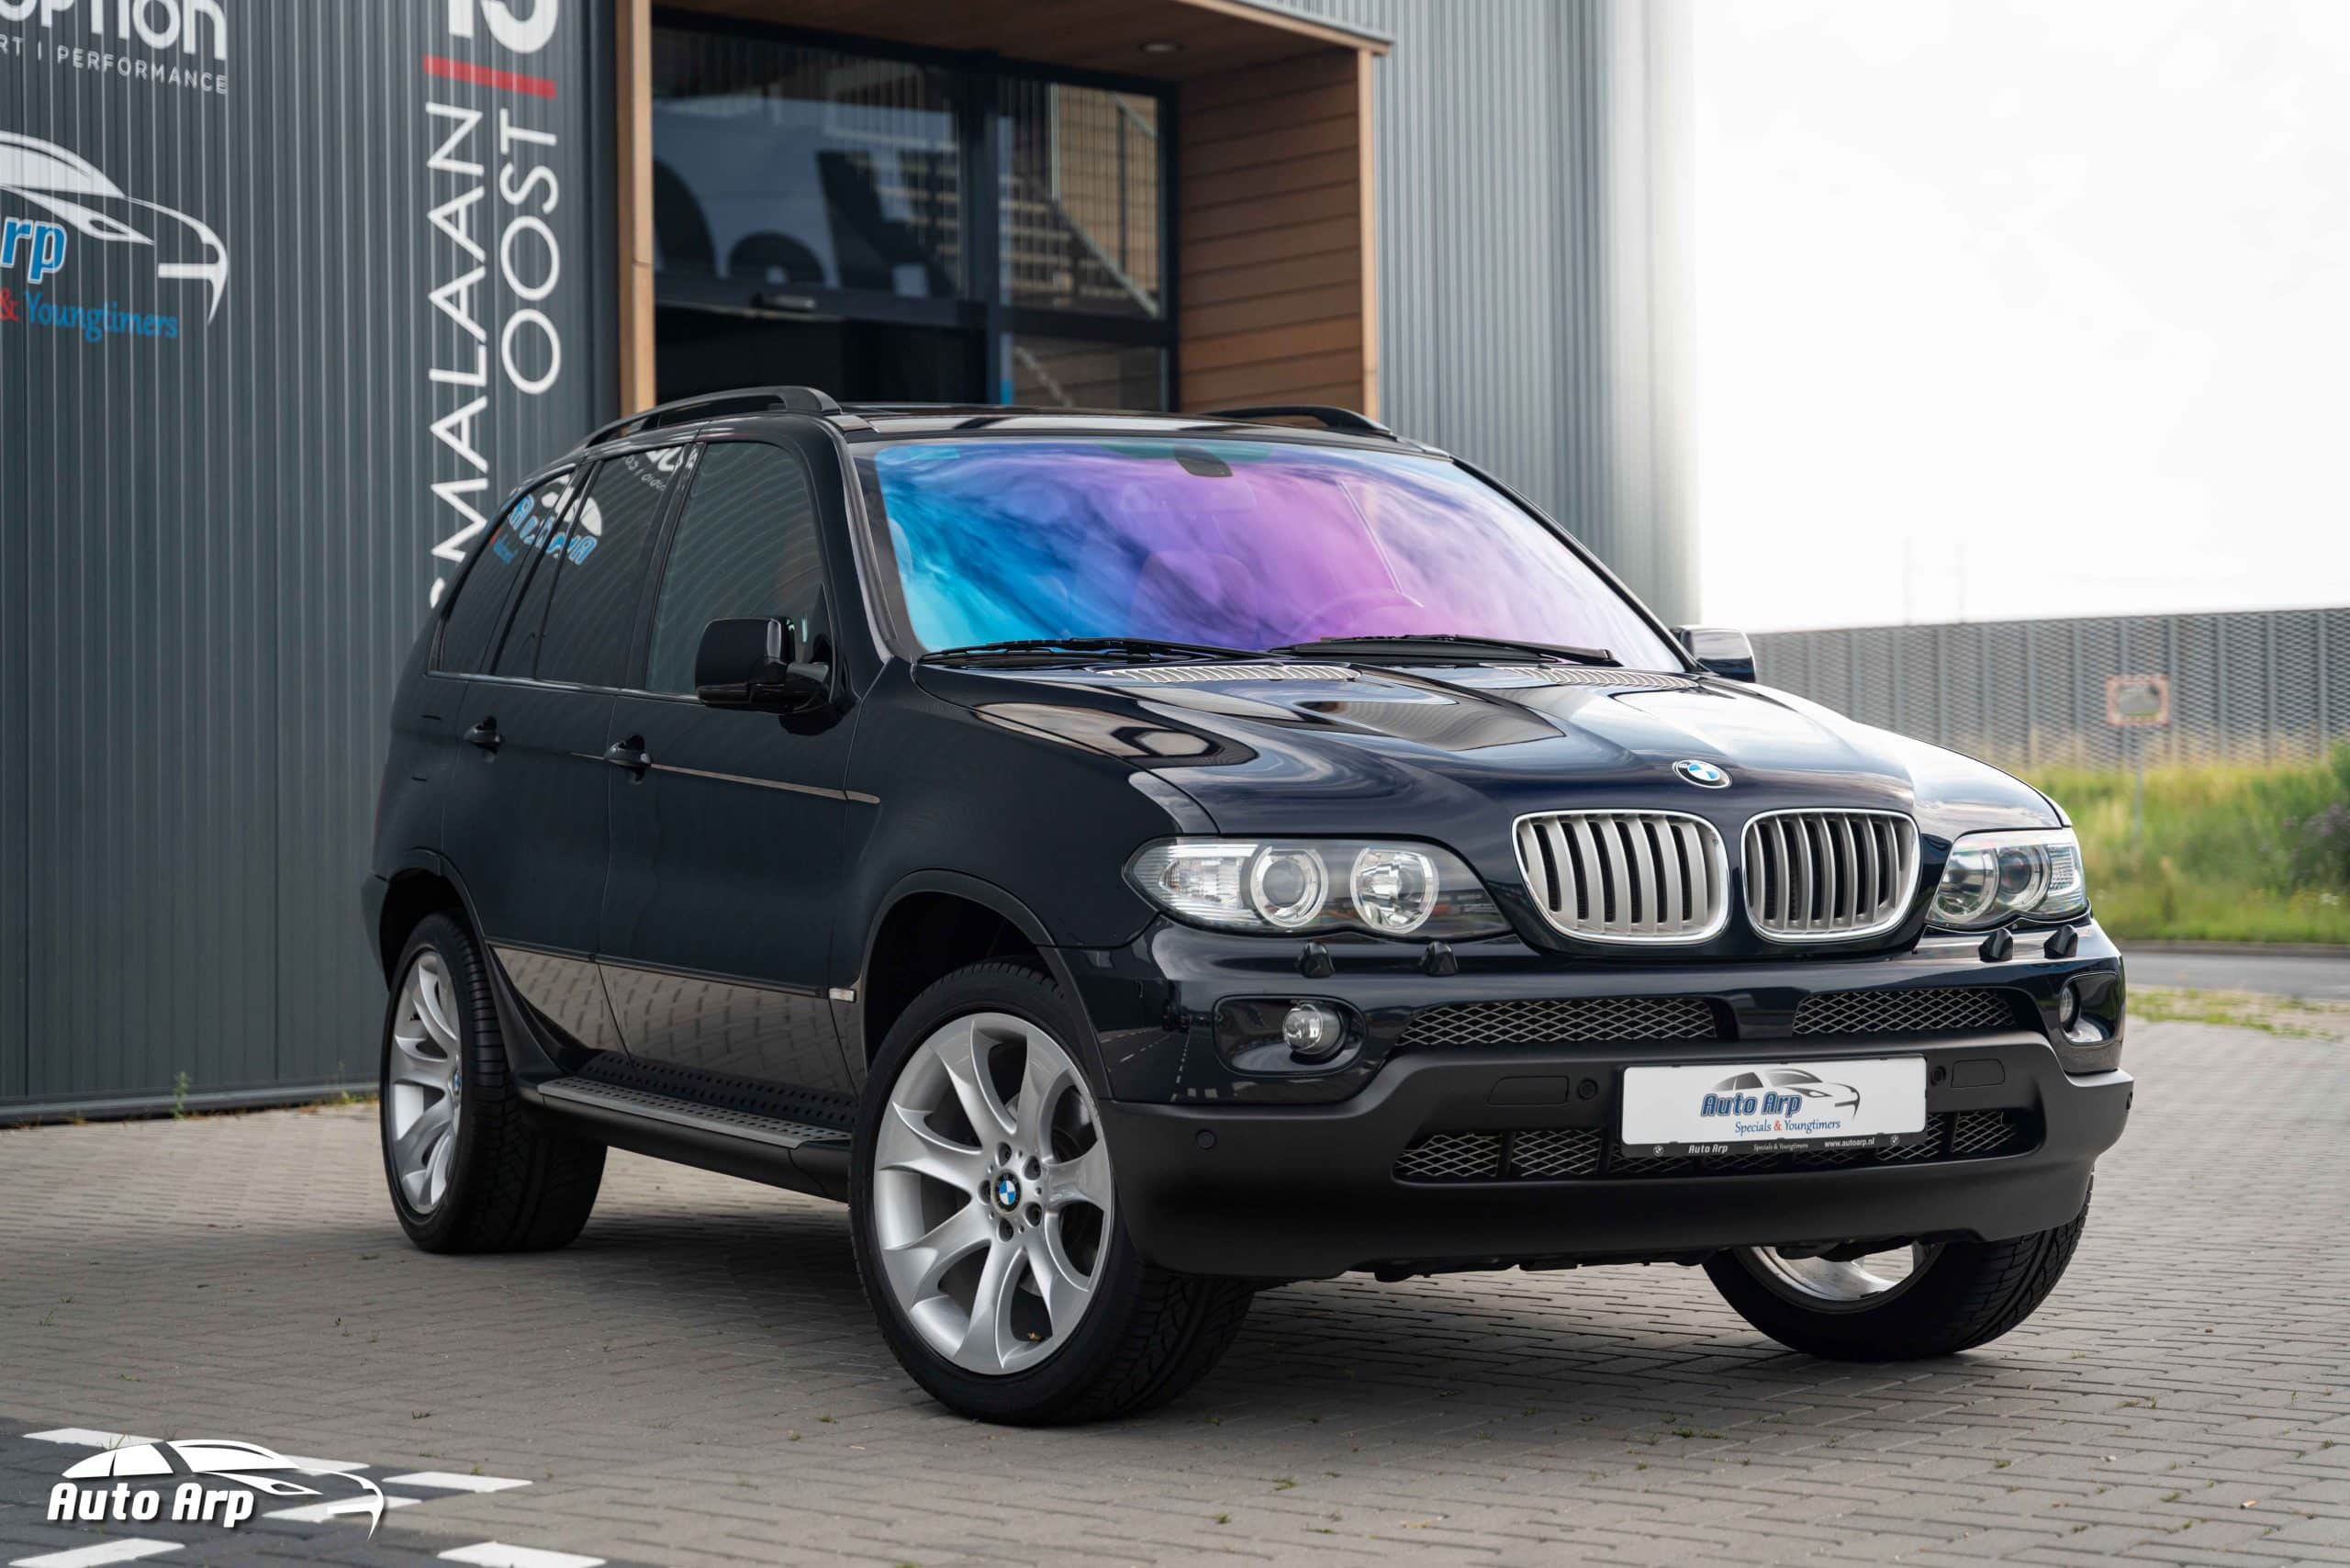 BMW E53 4.4 X5 individuell